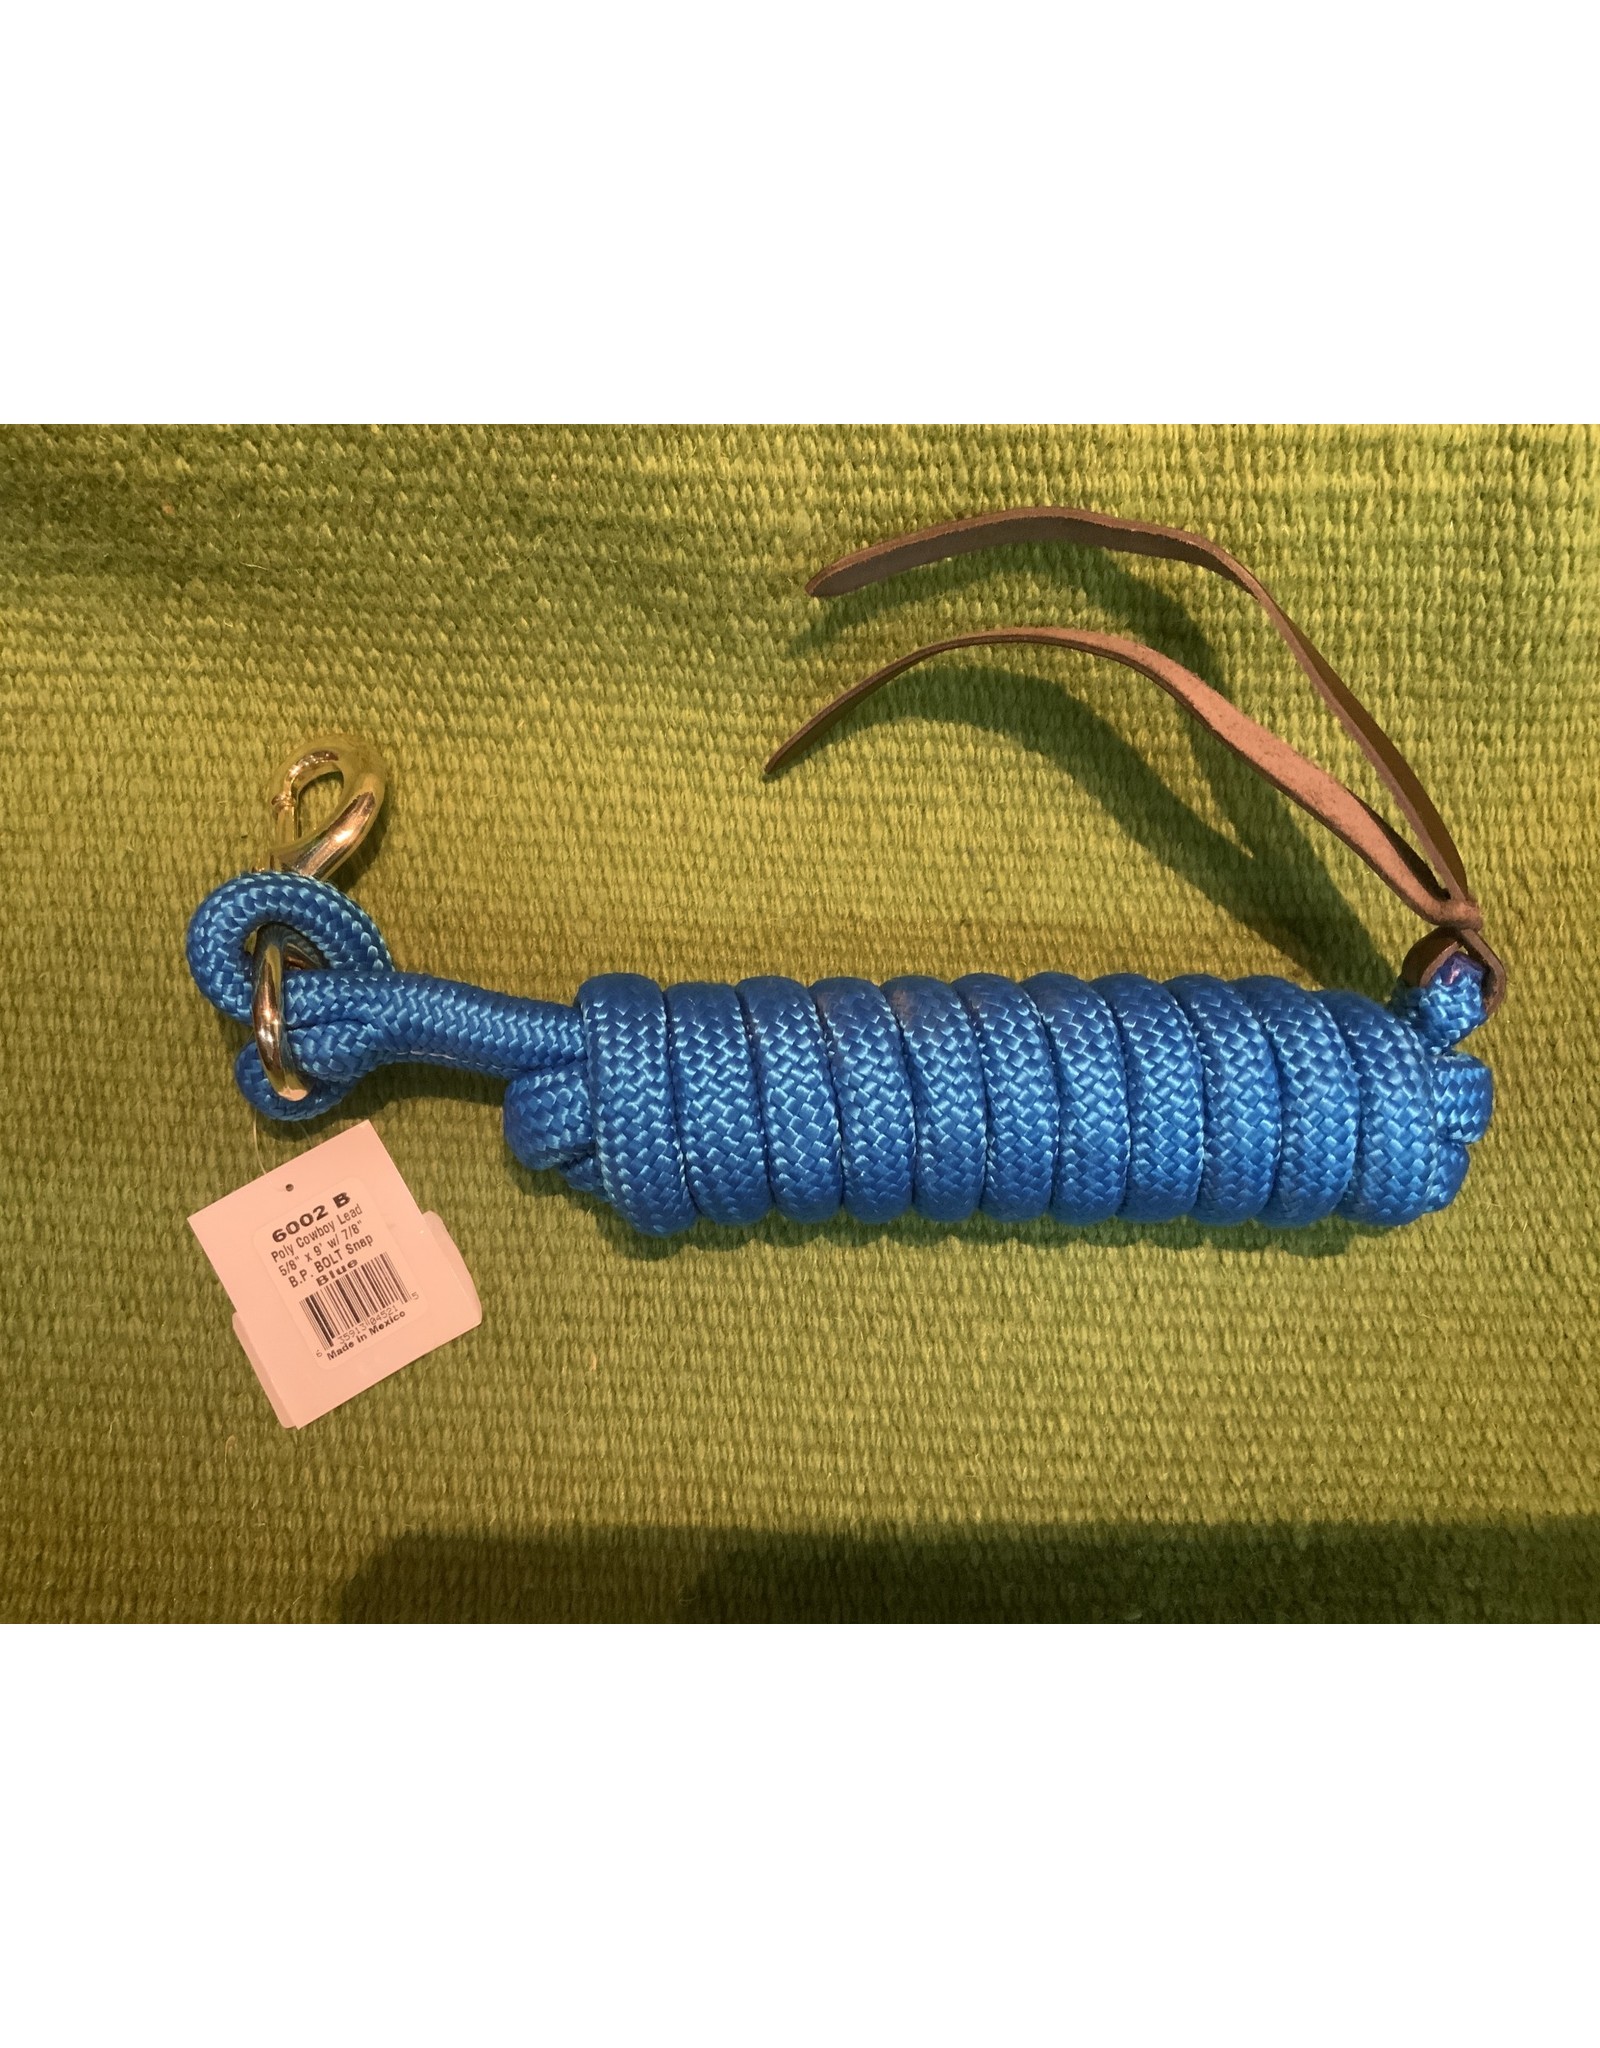 Mustang Cowboy Lead Rope 5/8" x 9' - Brass Plated Bolt Snap 7/8" - Blue - 292648-40